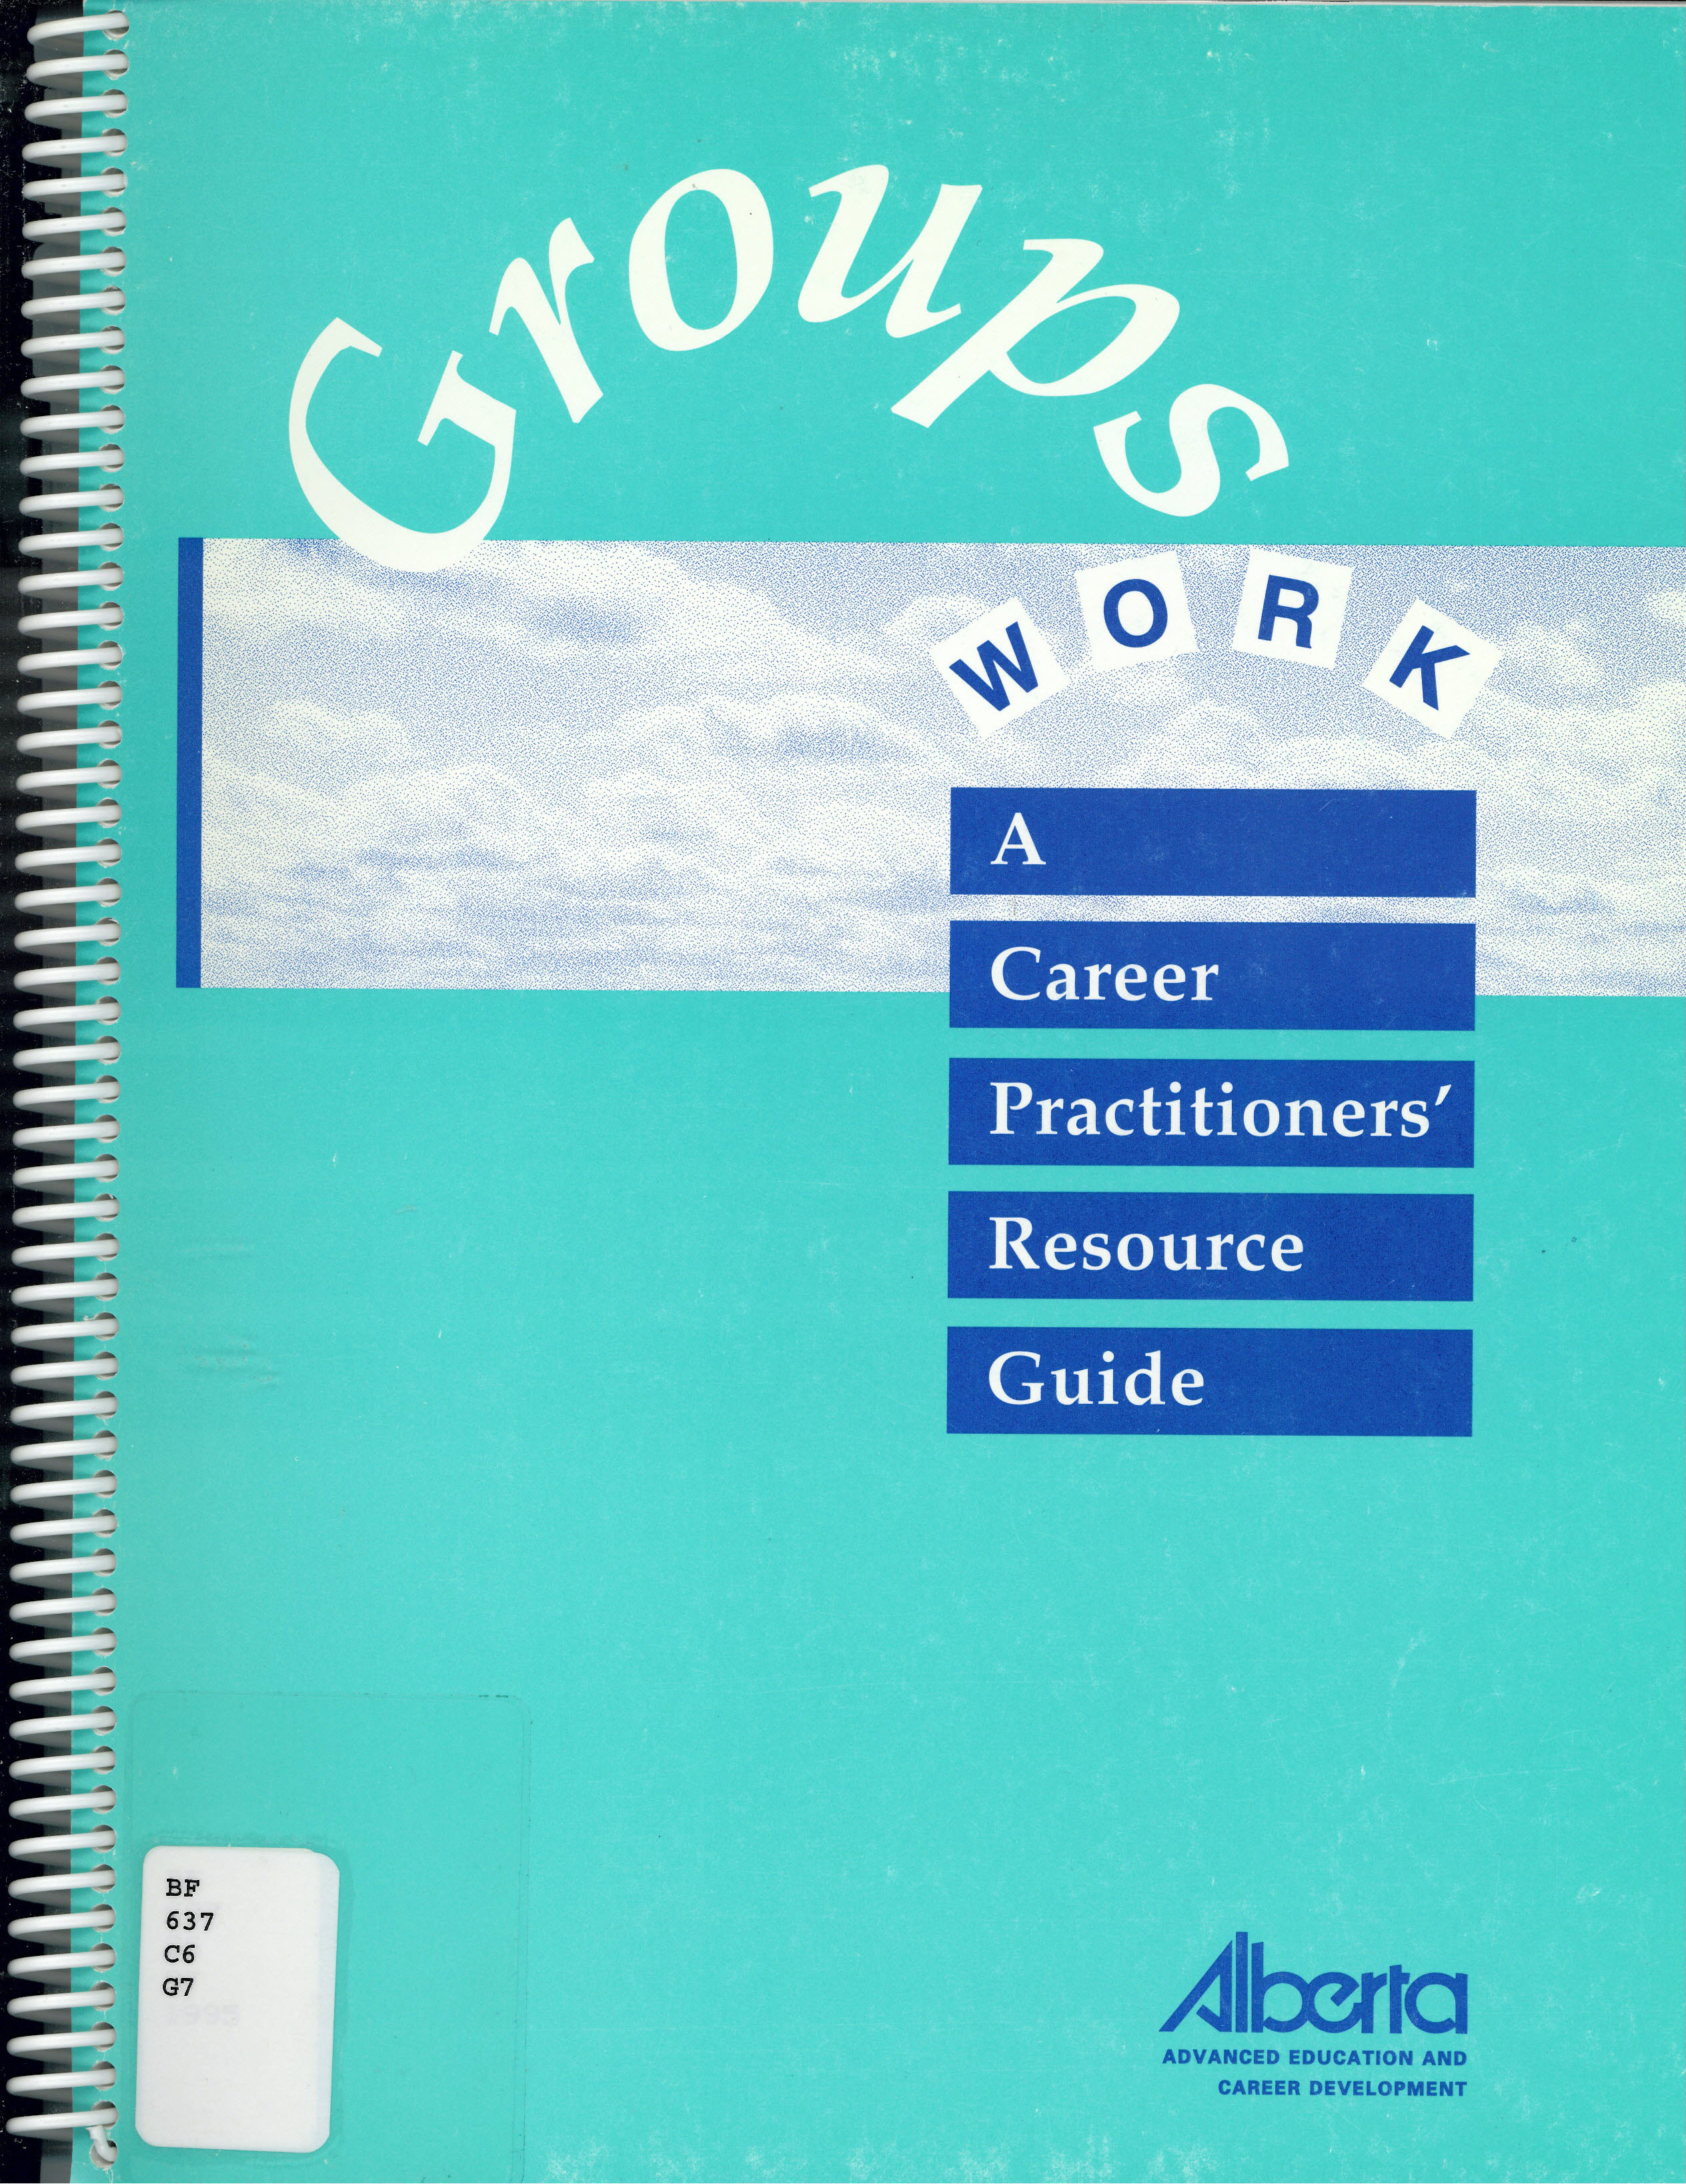 Groups work: : a career practitioners' resource guide